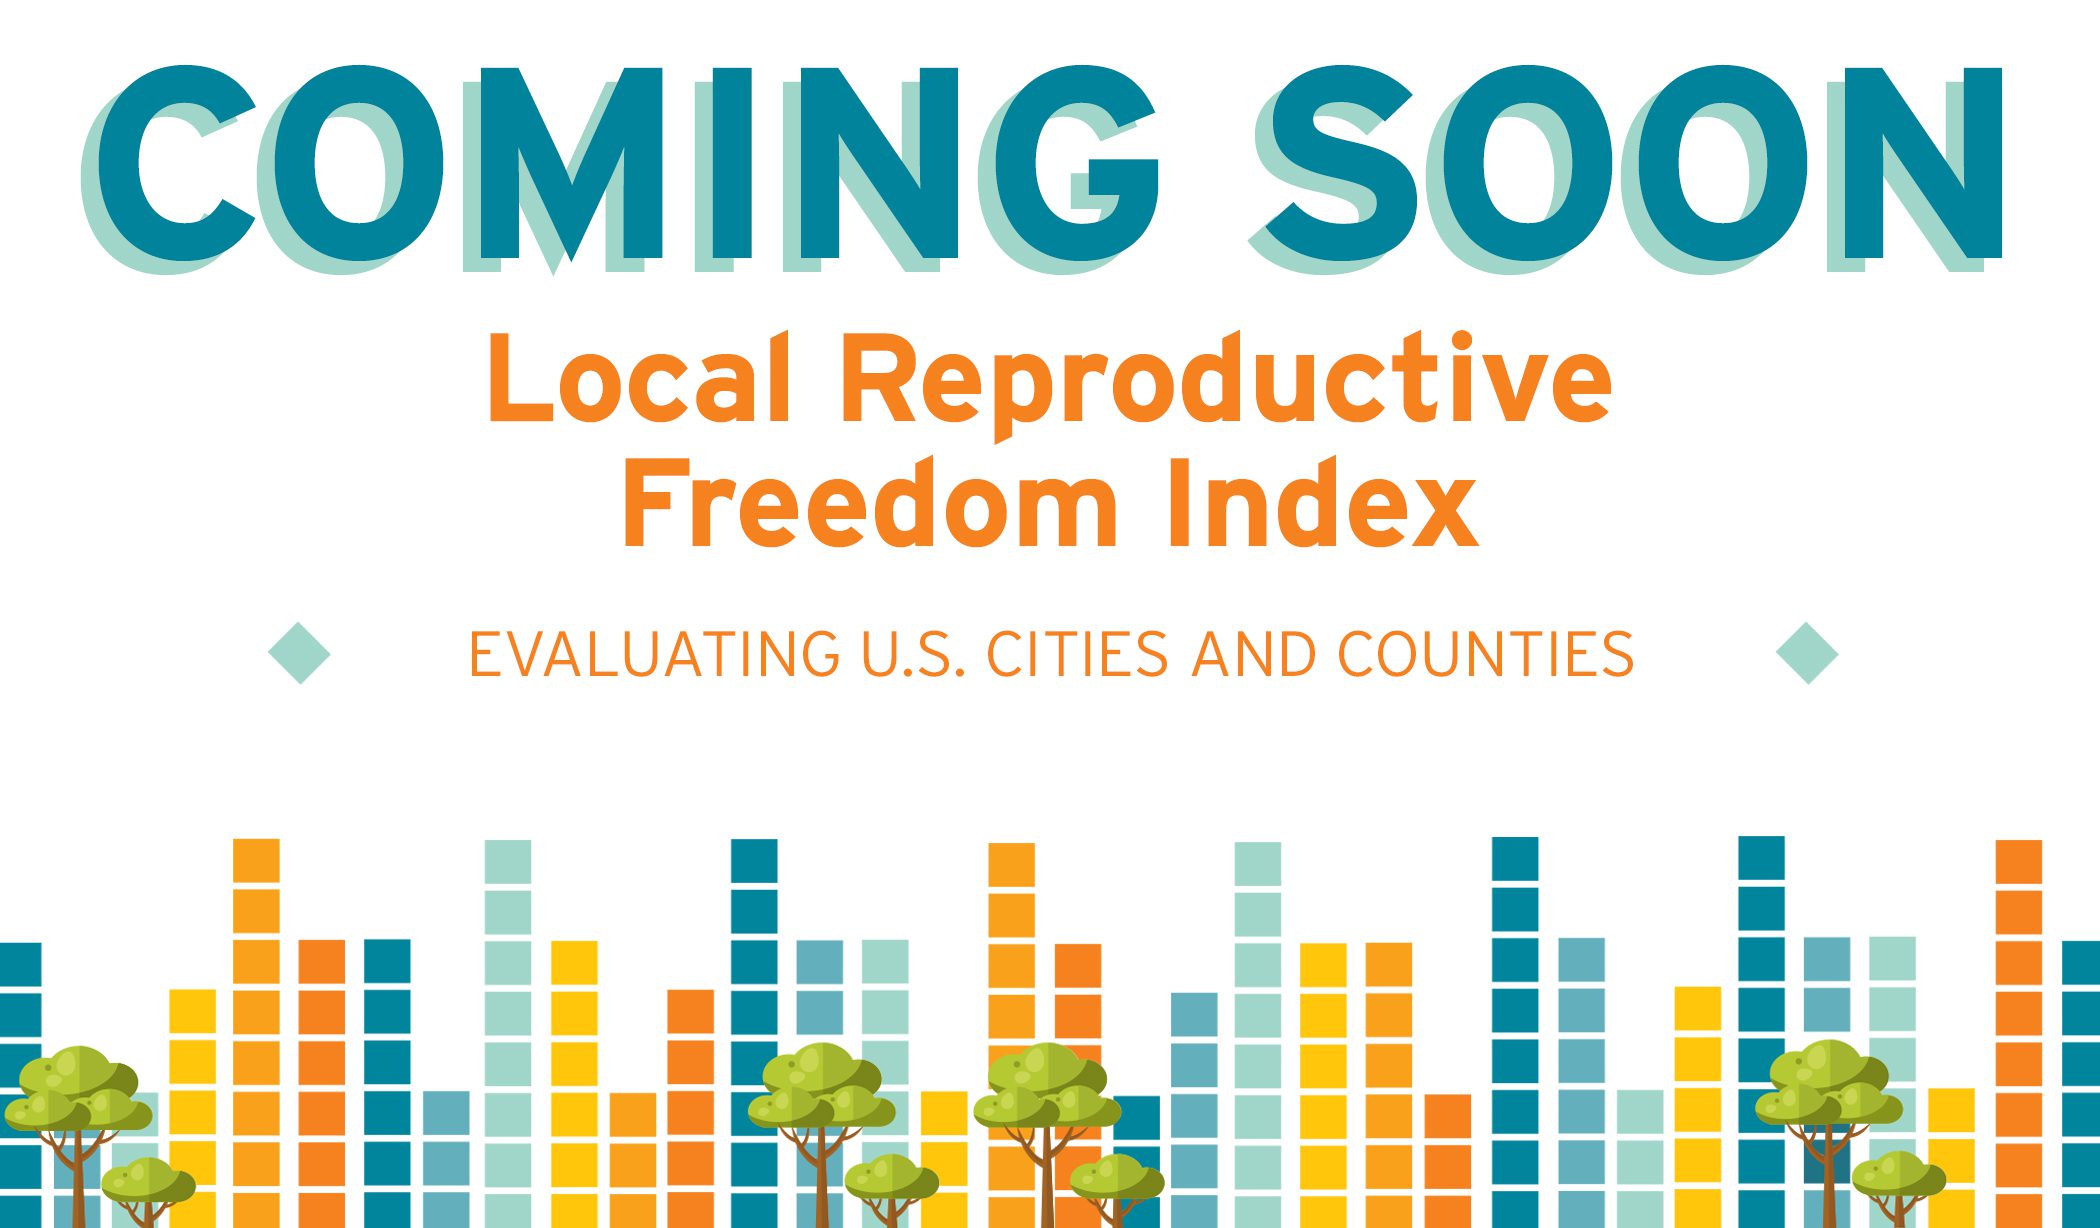 Coming Soon: Local Reproductive Freedom Index